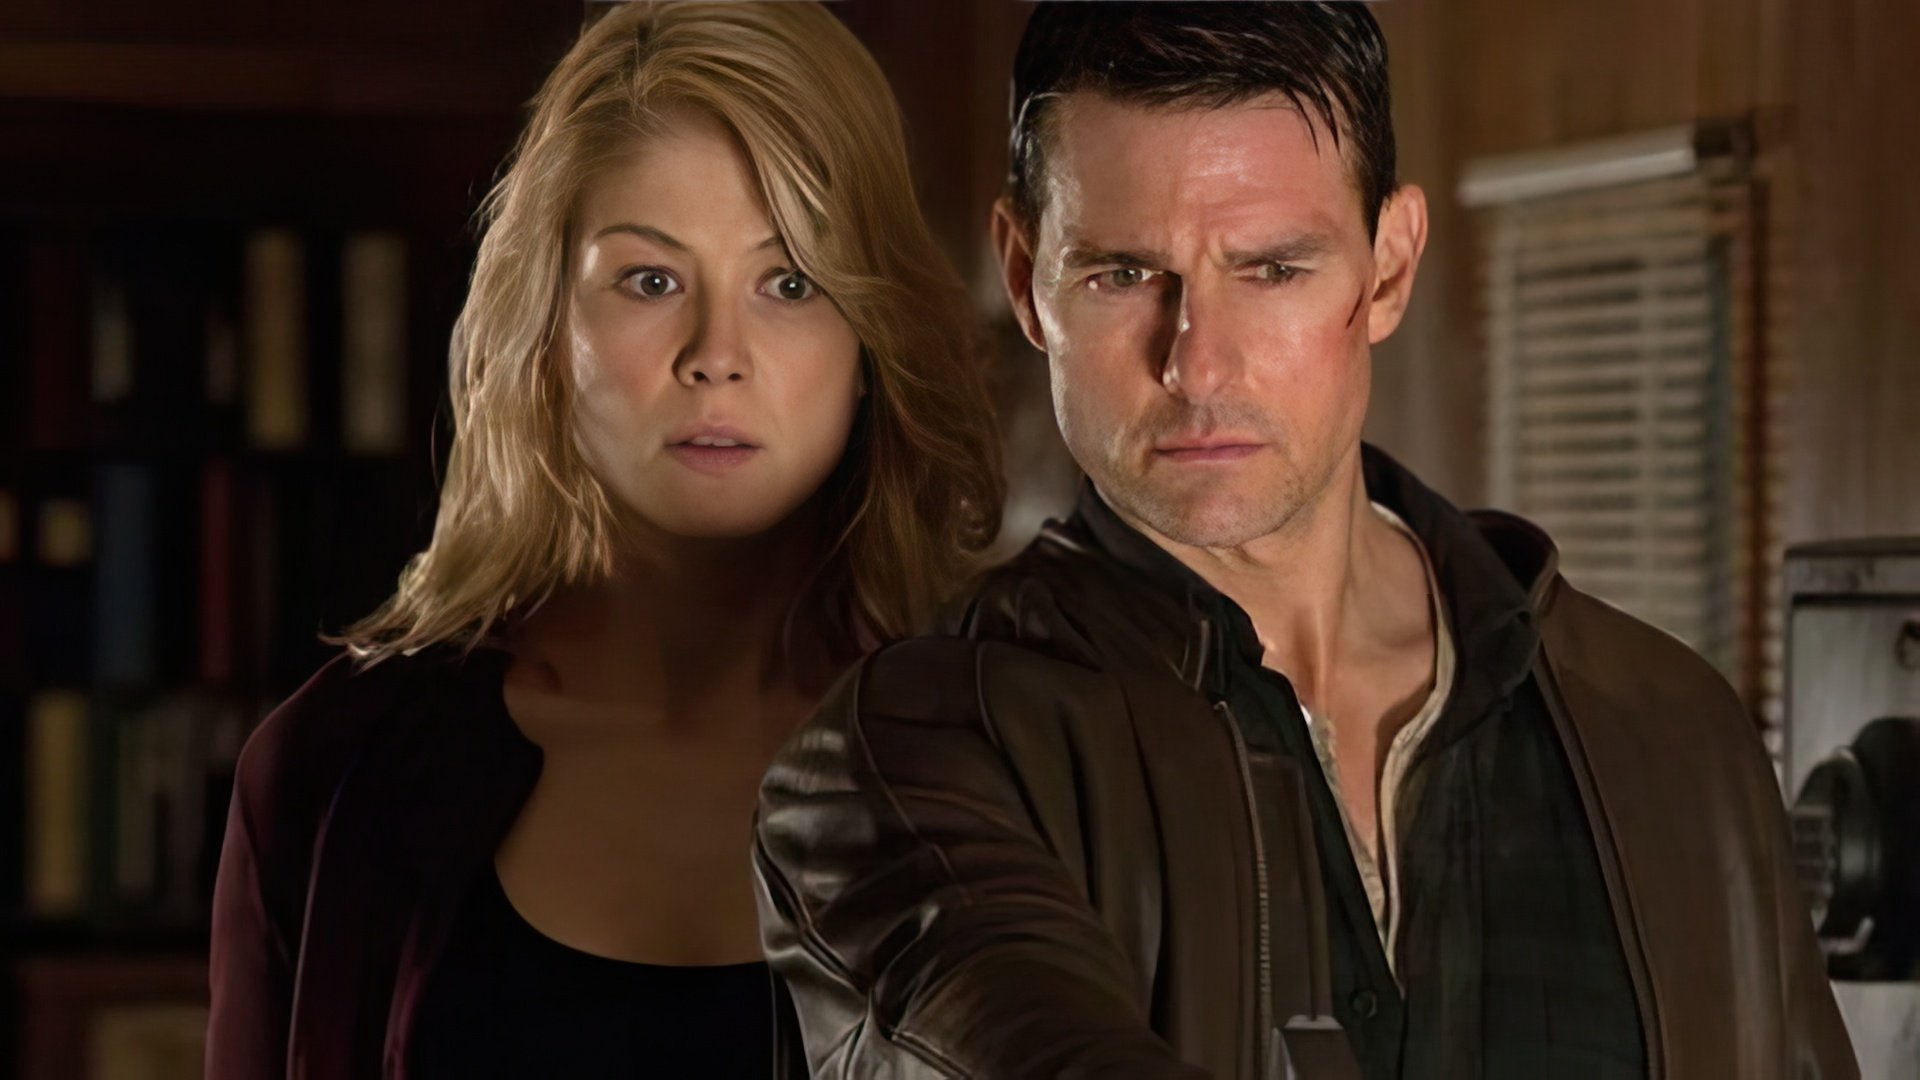 Rosamund Pike and Tom Cruise in the Jack Reacher